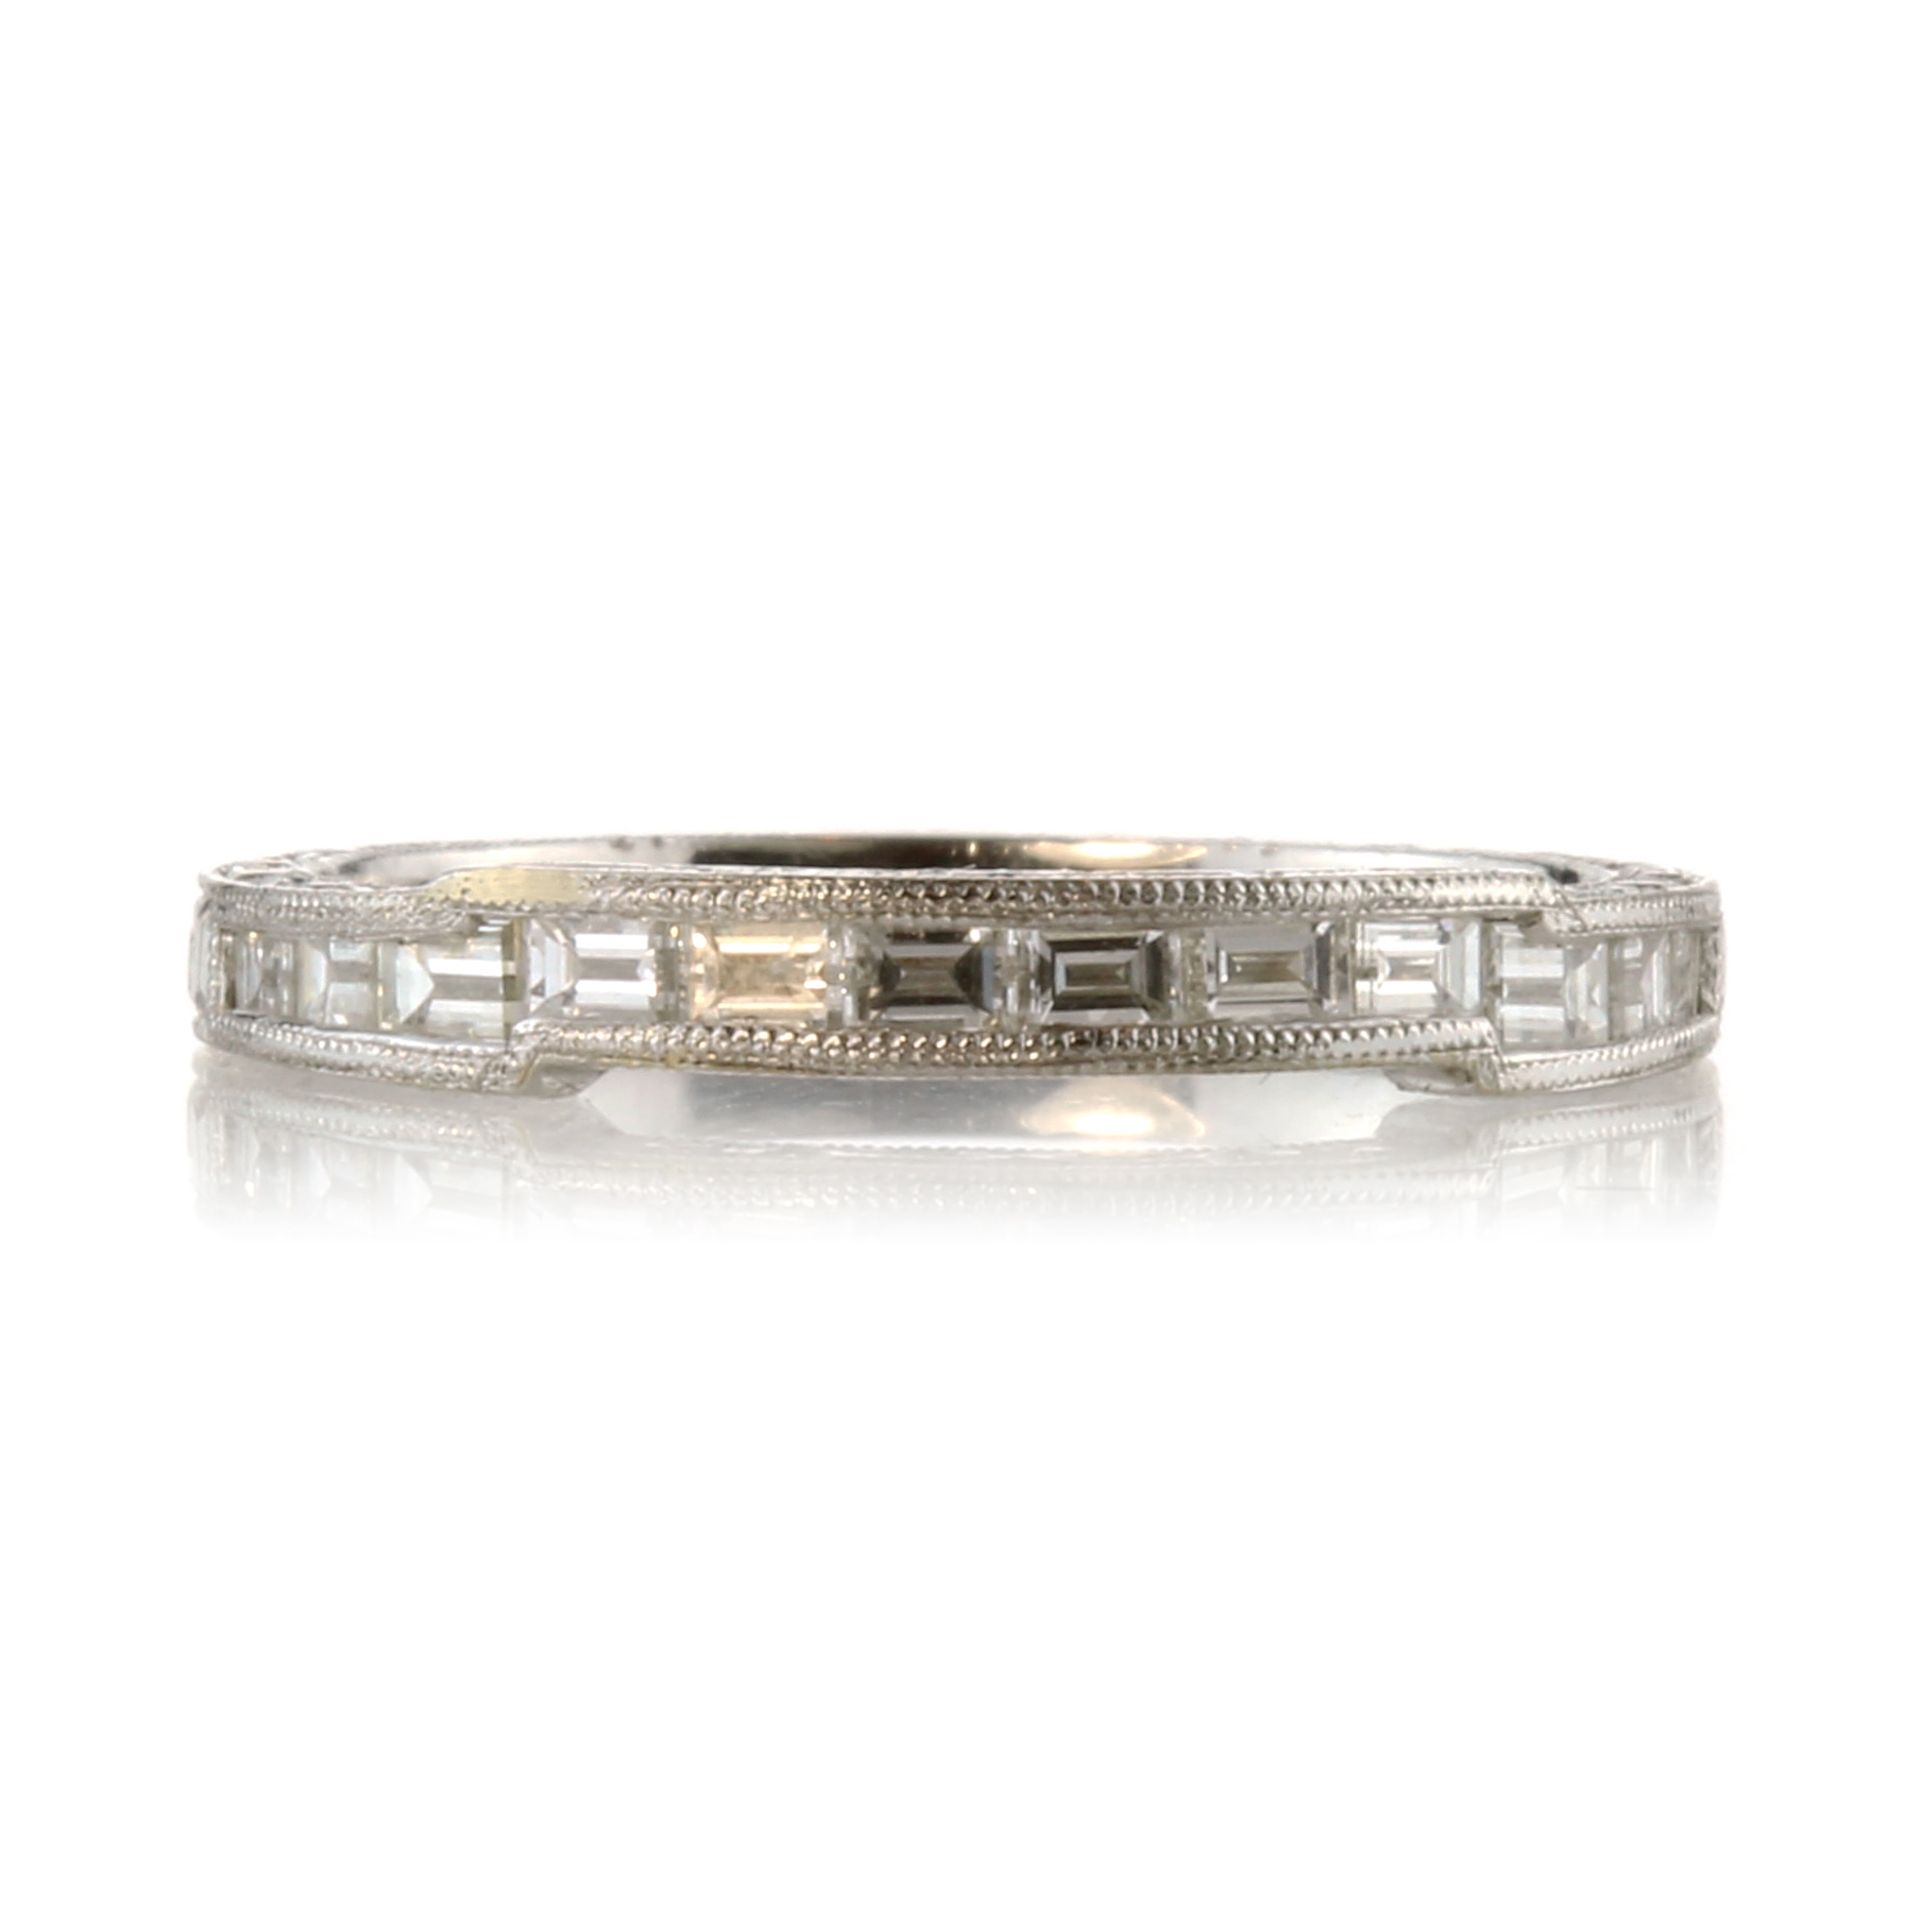 A diamond half eternity band ring in 18ct white gold set with twelve baguette cut diamonds totalling